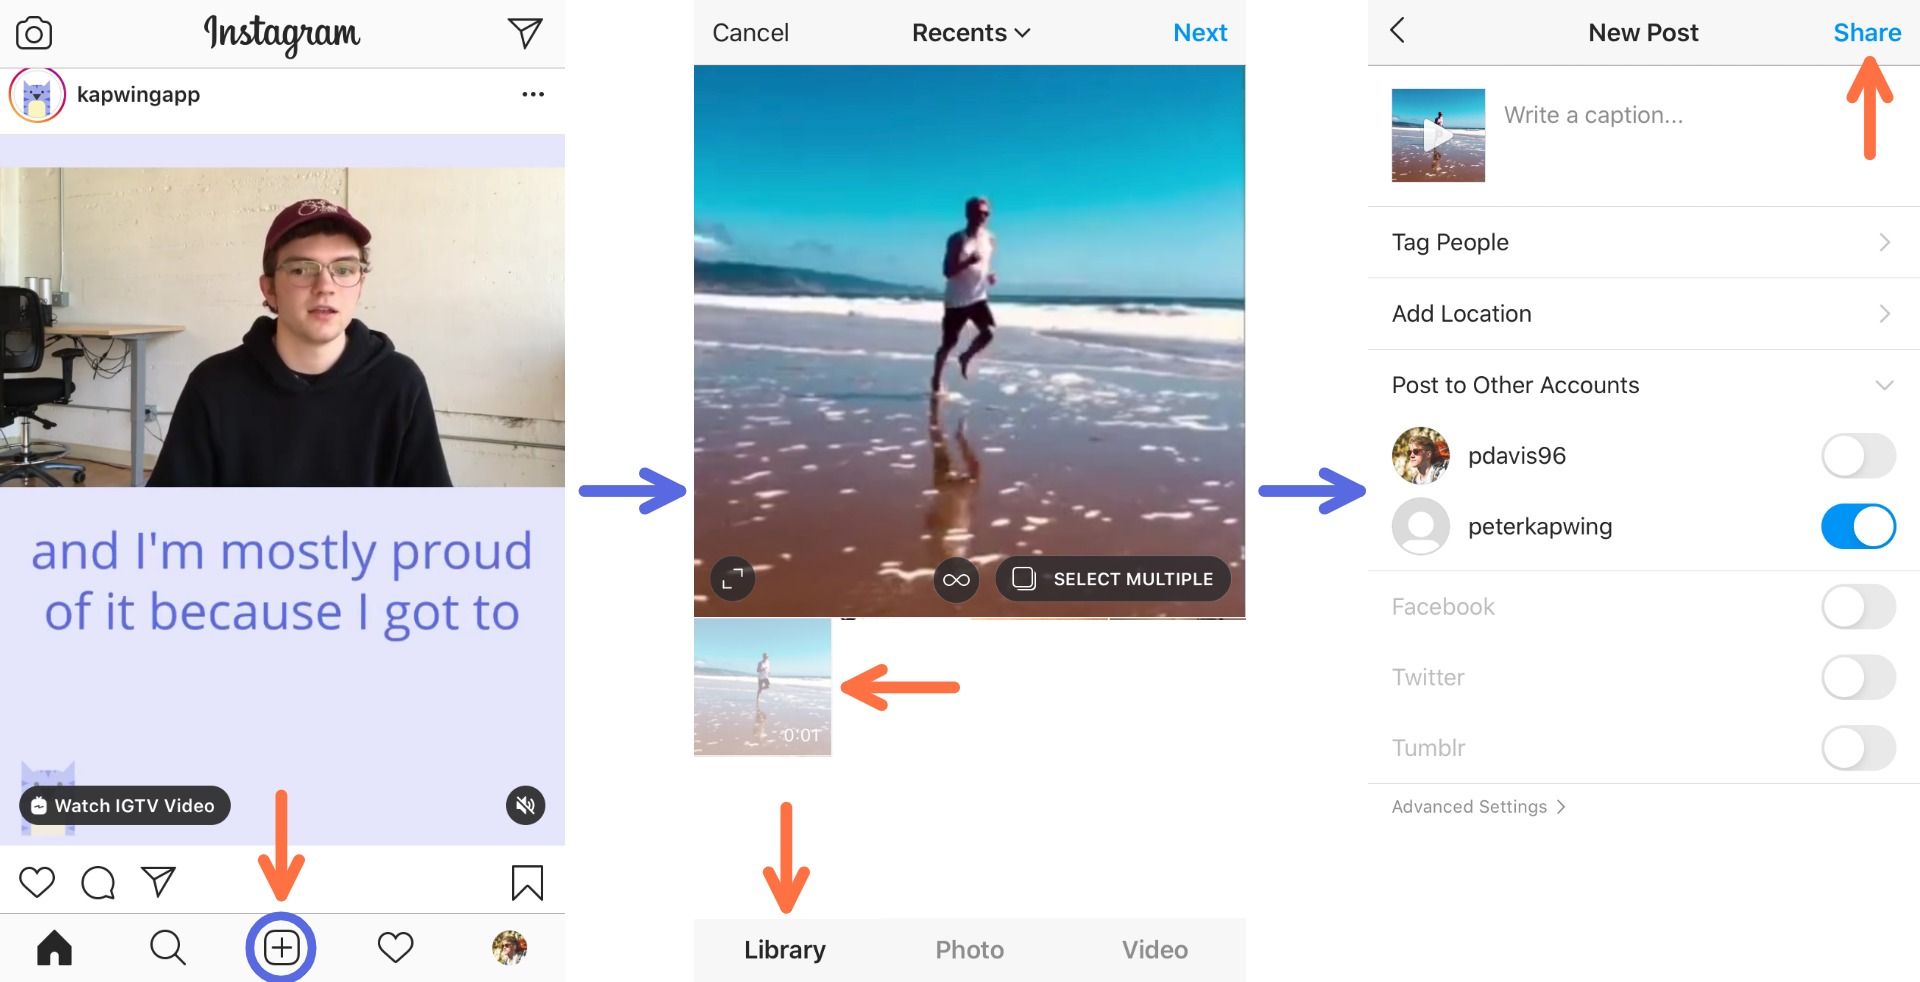 Screenshots showing how to share videos on Instagram.